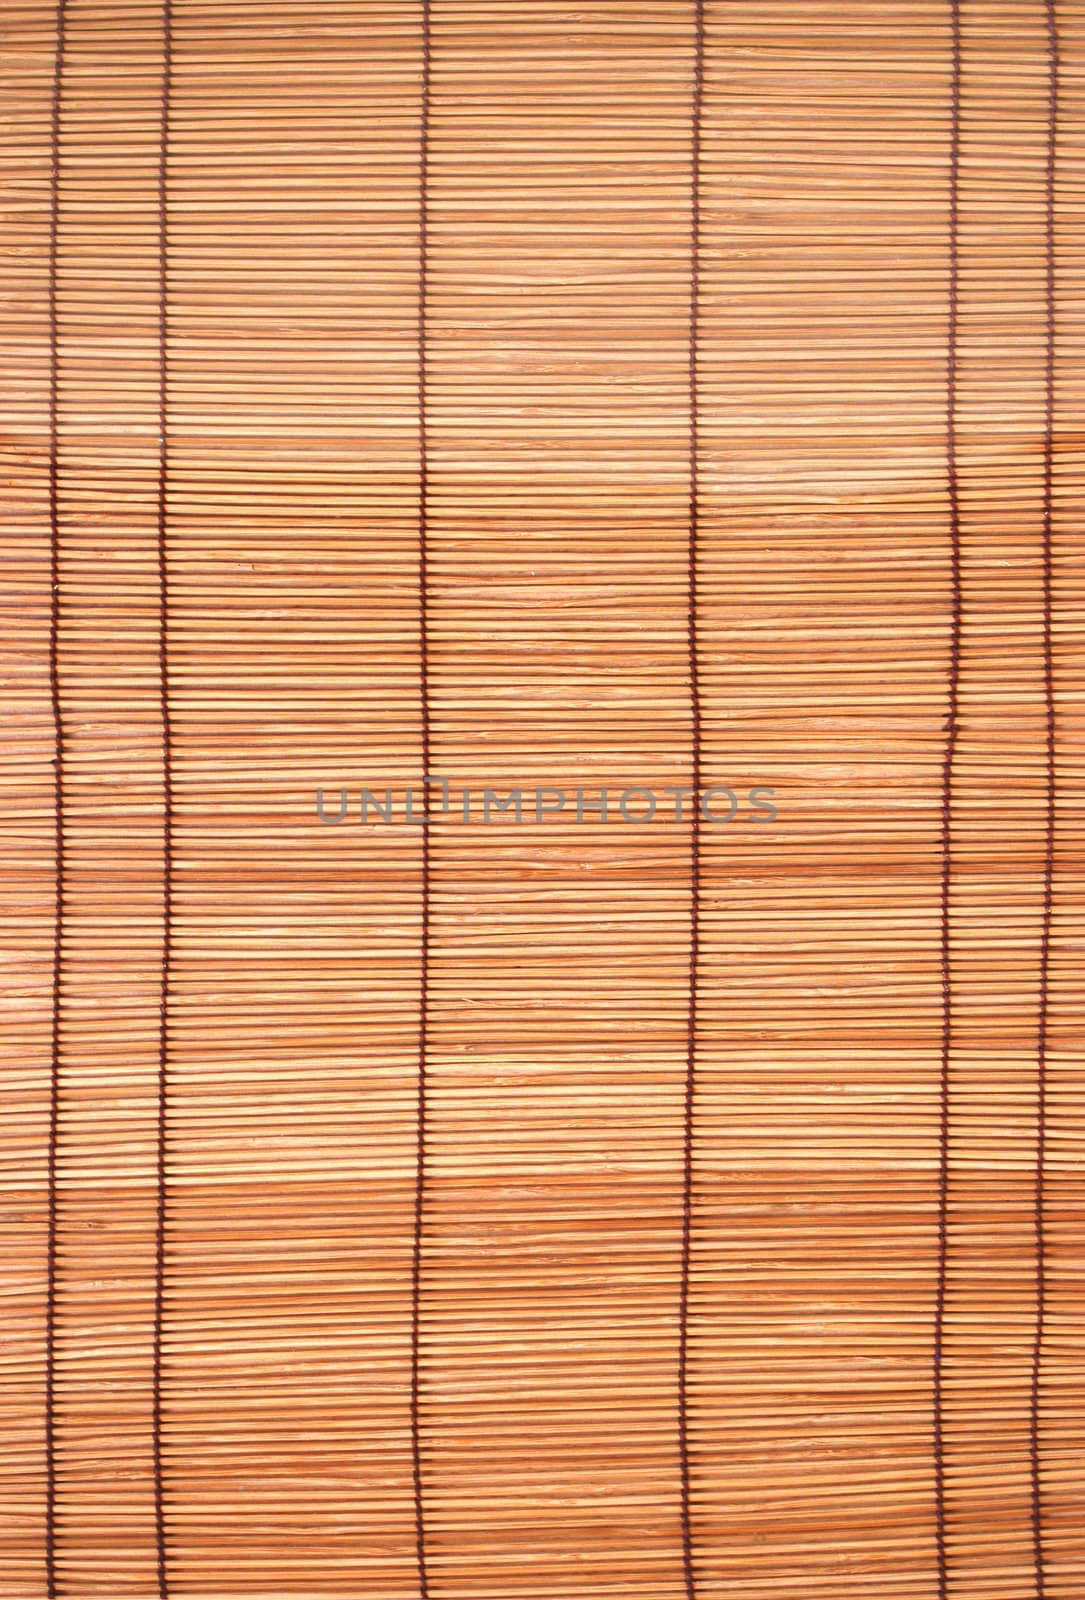 brown bamboo matting background and texture